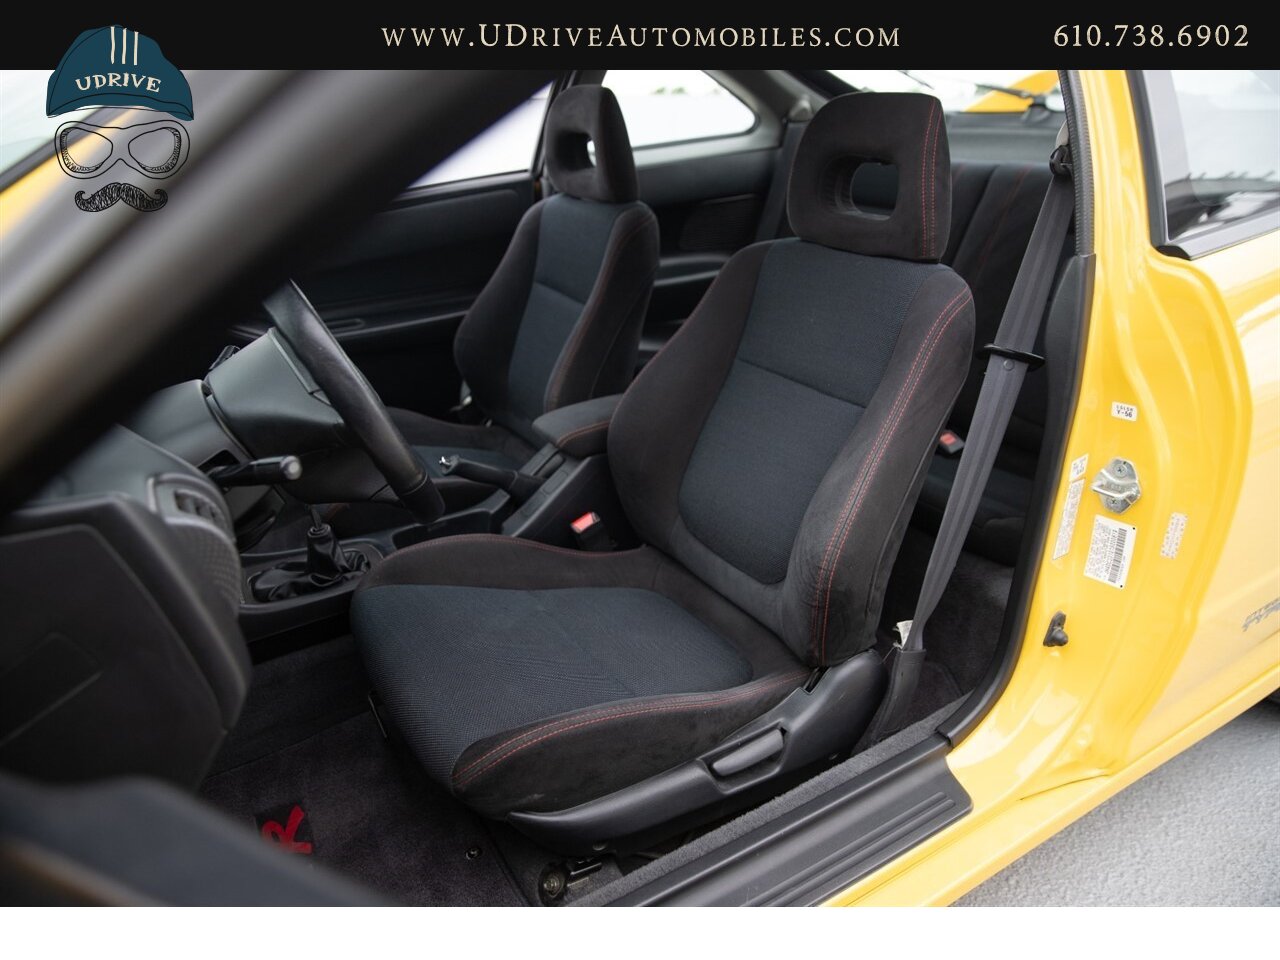 2001 Acura Integra Type R  38k Miles 2 Owners - Photo 29 - West Chester, PA 19382